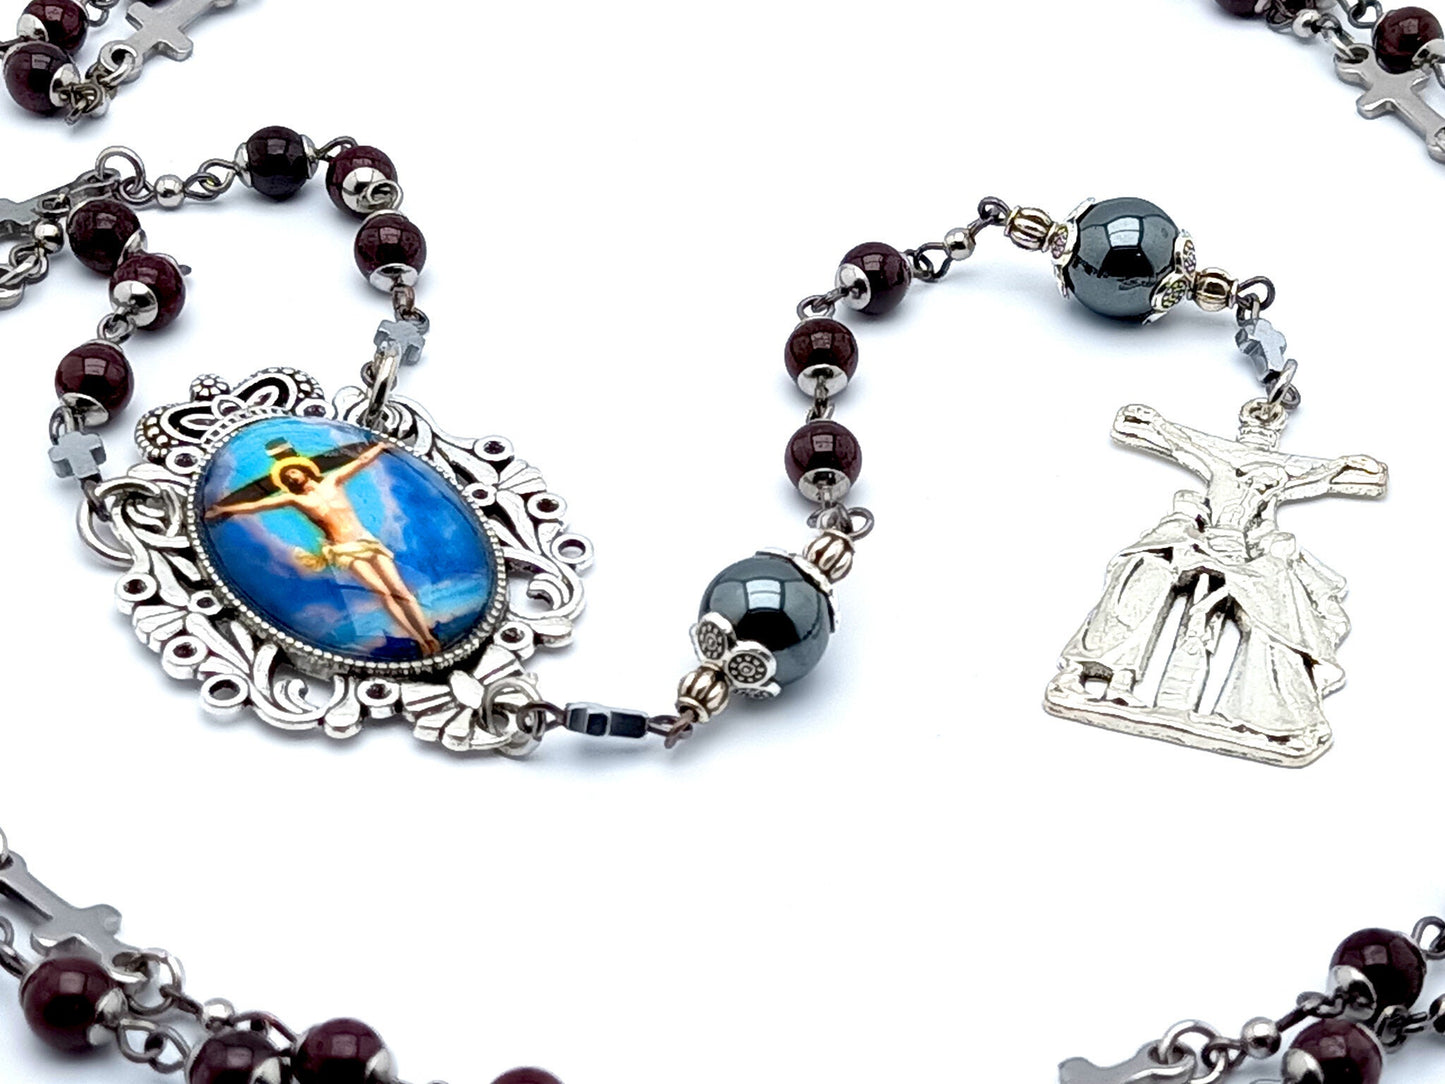 Stations of the Cross unique rosary beads garnet gemstone prayer chaplet with Saint John and Virgin crucifix with stainless steel cross beads.